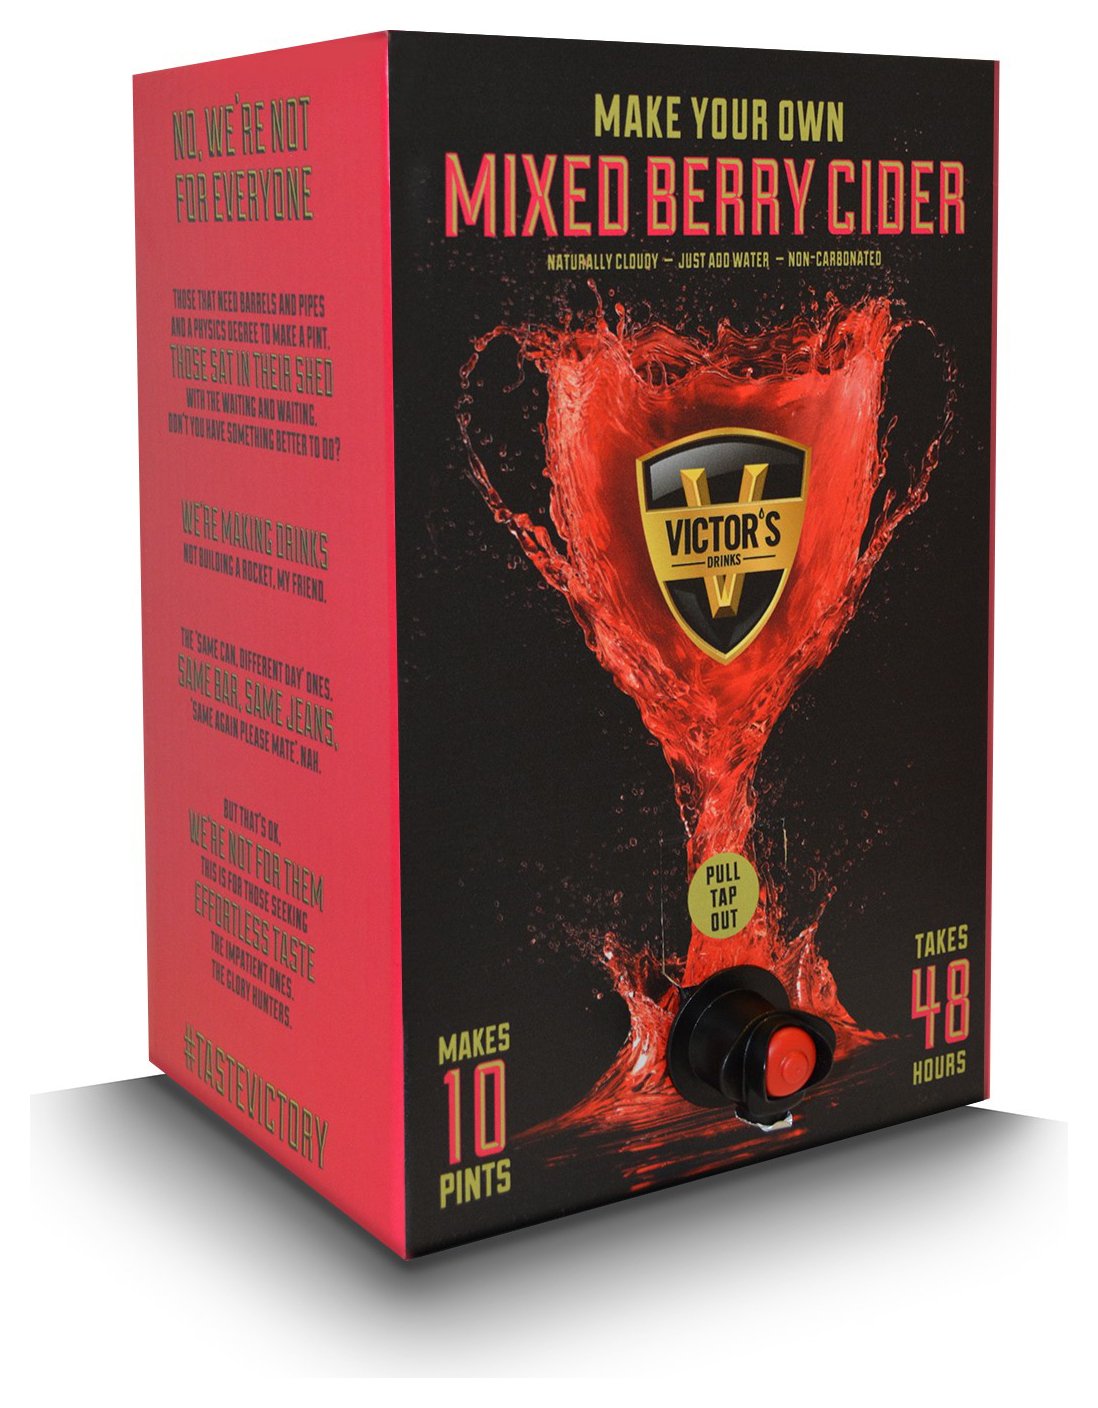 Victor's Drinks Mixed Berry Cider Home Brew Kit - 10 Pint. Review